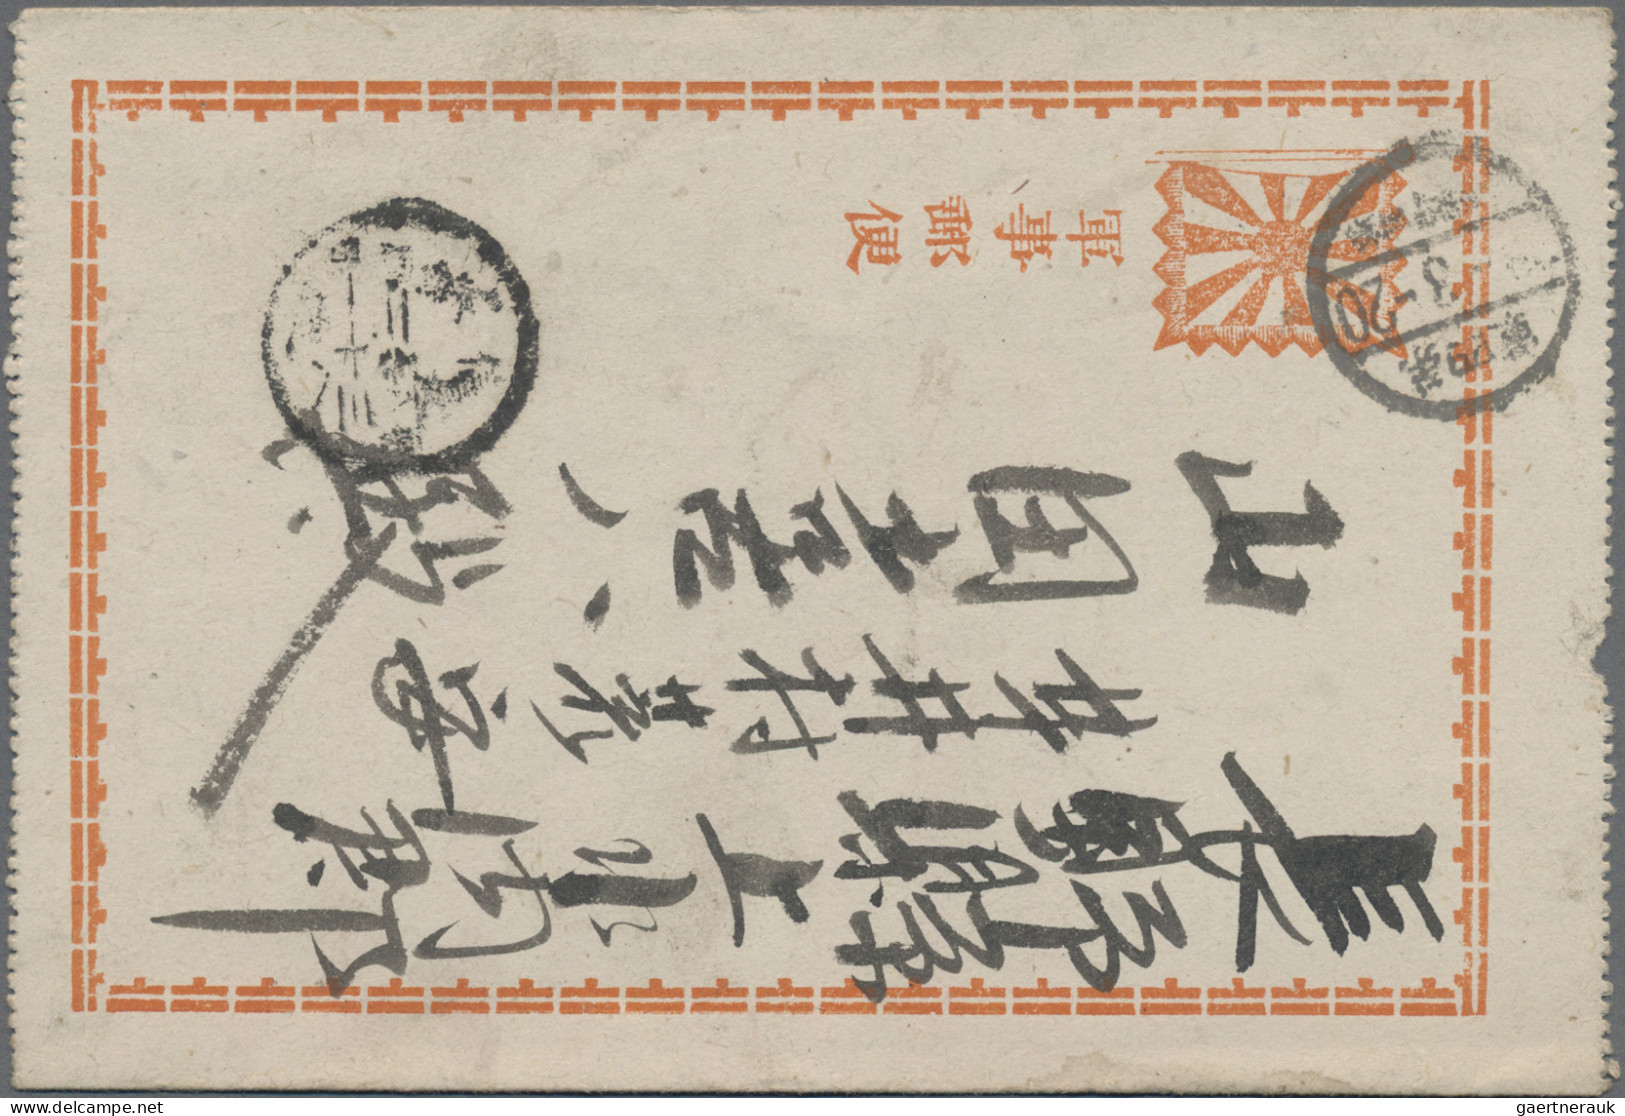 Japan: 1904/1905, Russo-Japanese war, "No. 4 Army / ... field post office" postm